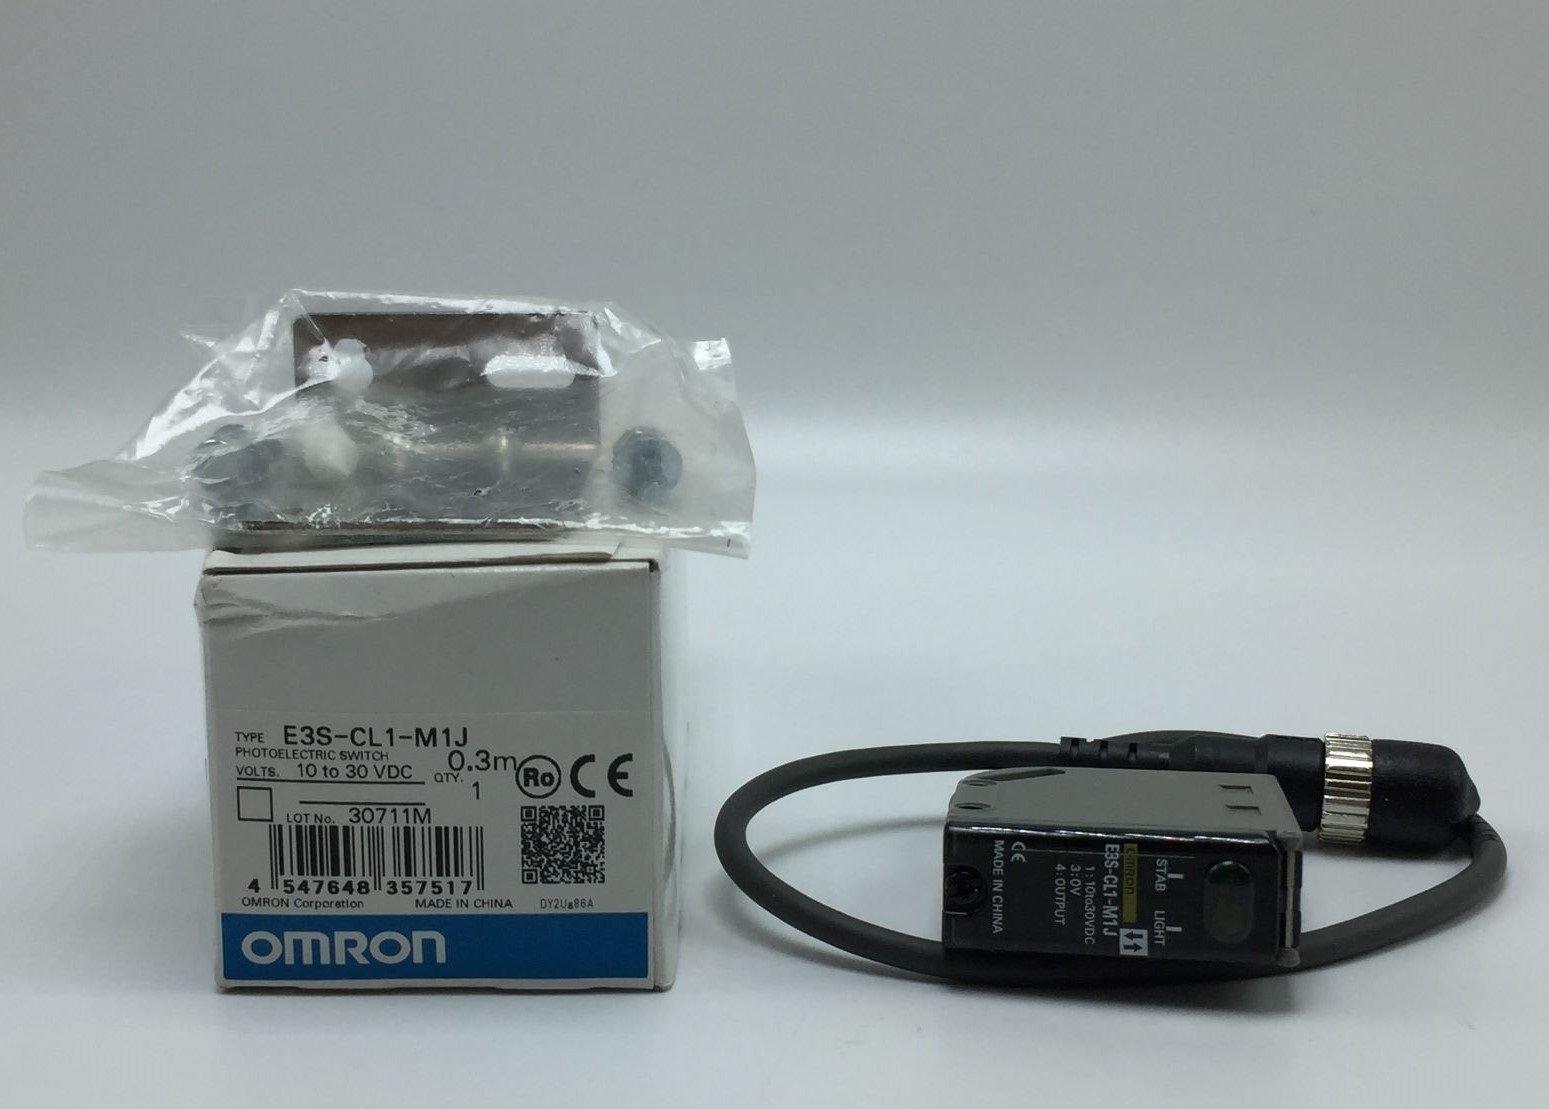 OMRON E3S-CL1-M1J PHOTOELECTRIC SWITCH 10-30VDC 0.3M CABLE RANGE 200 MMM 